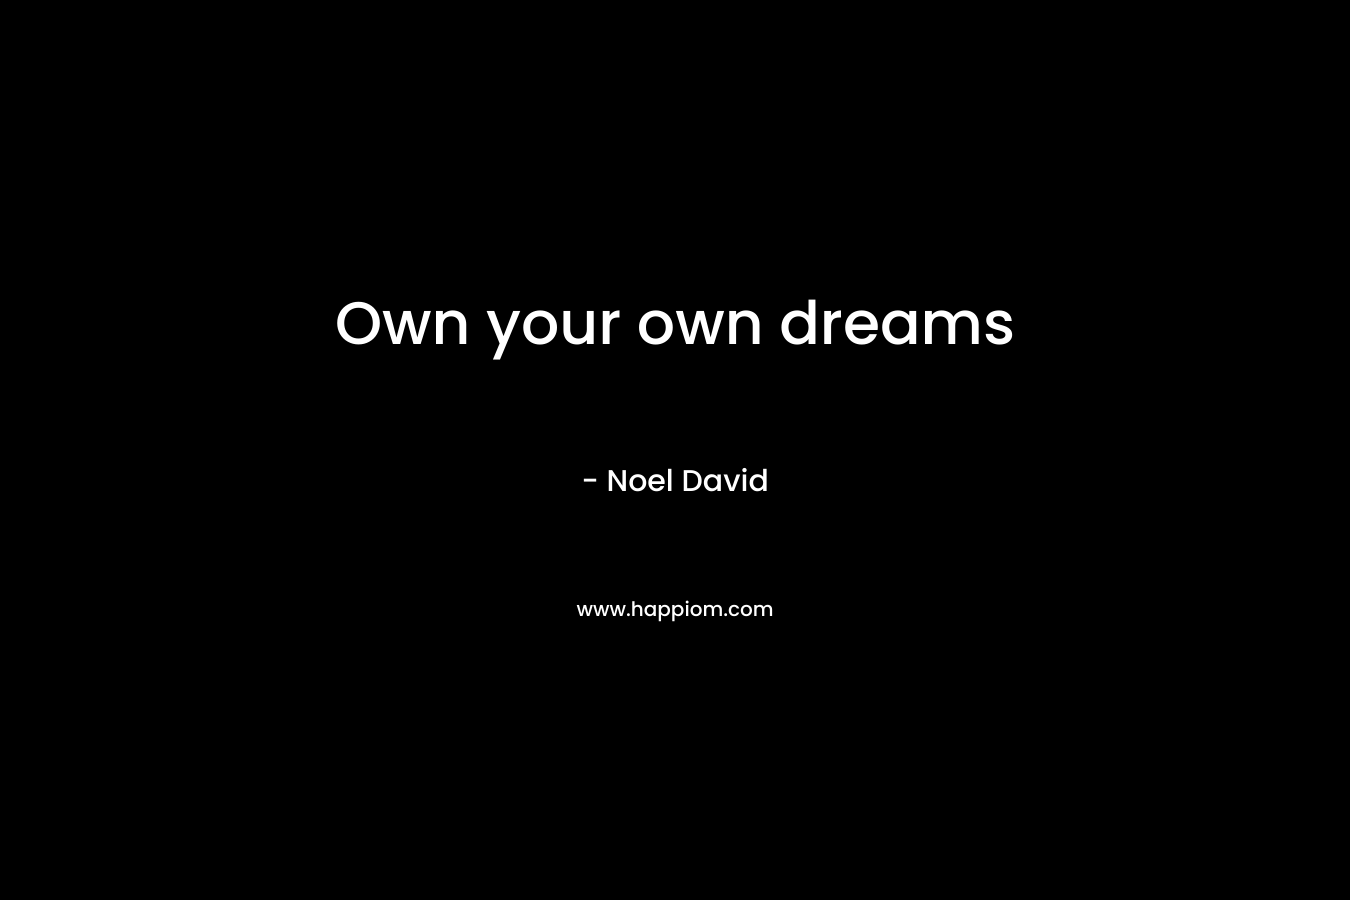 Own your own dreams